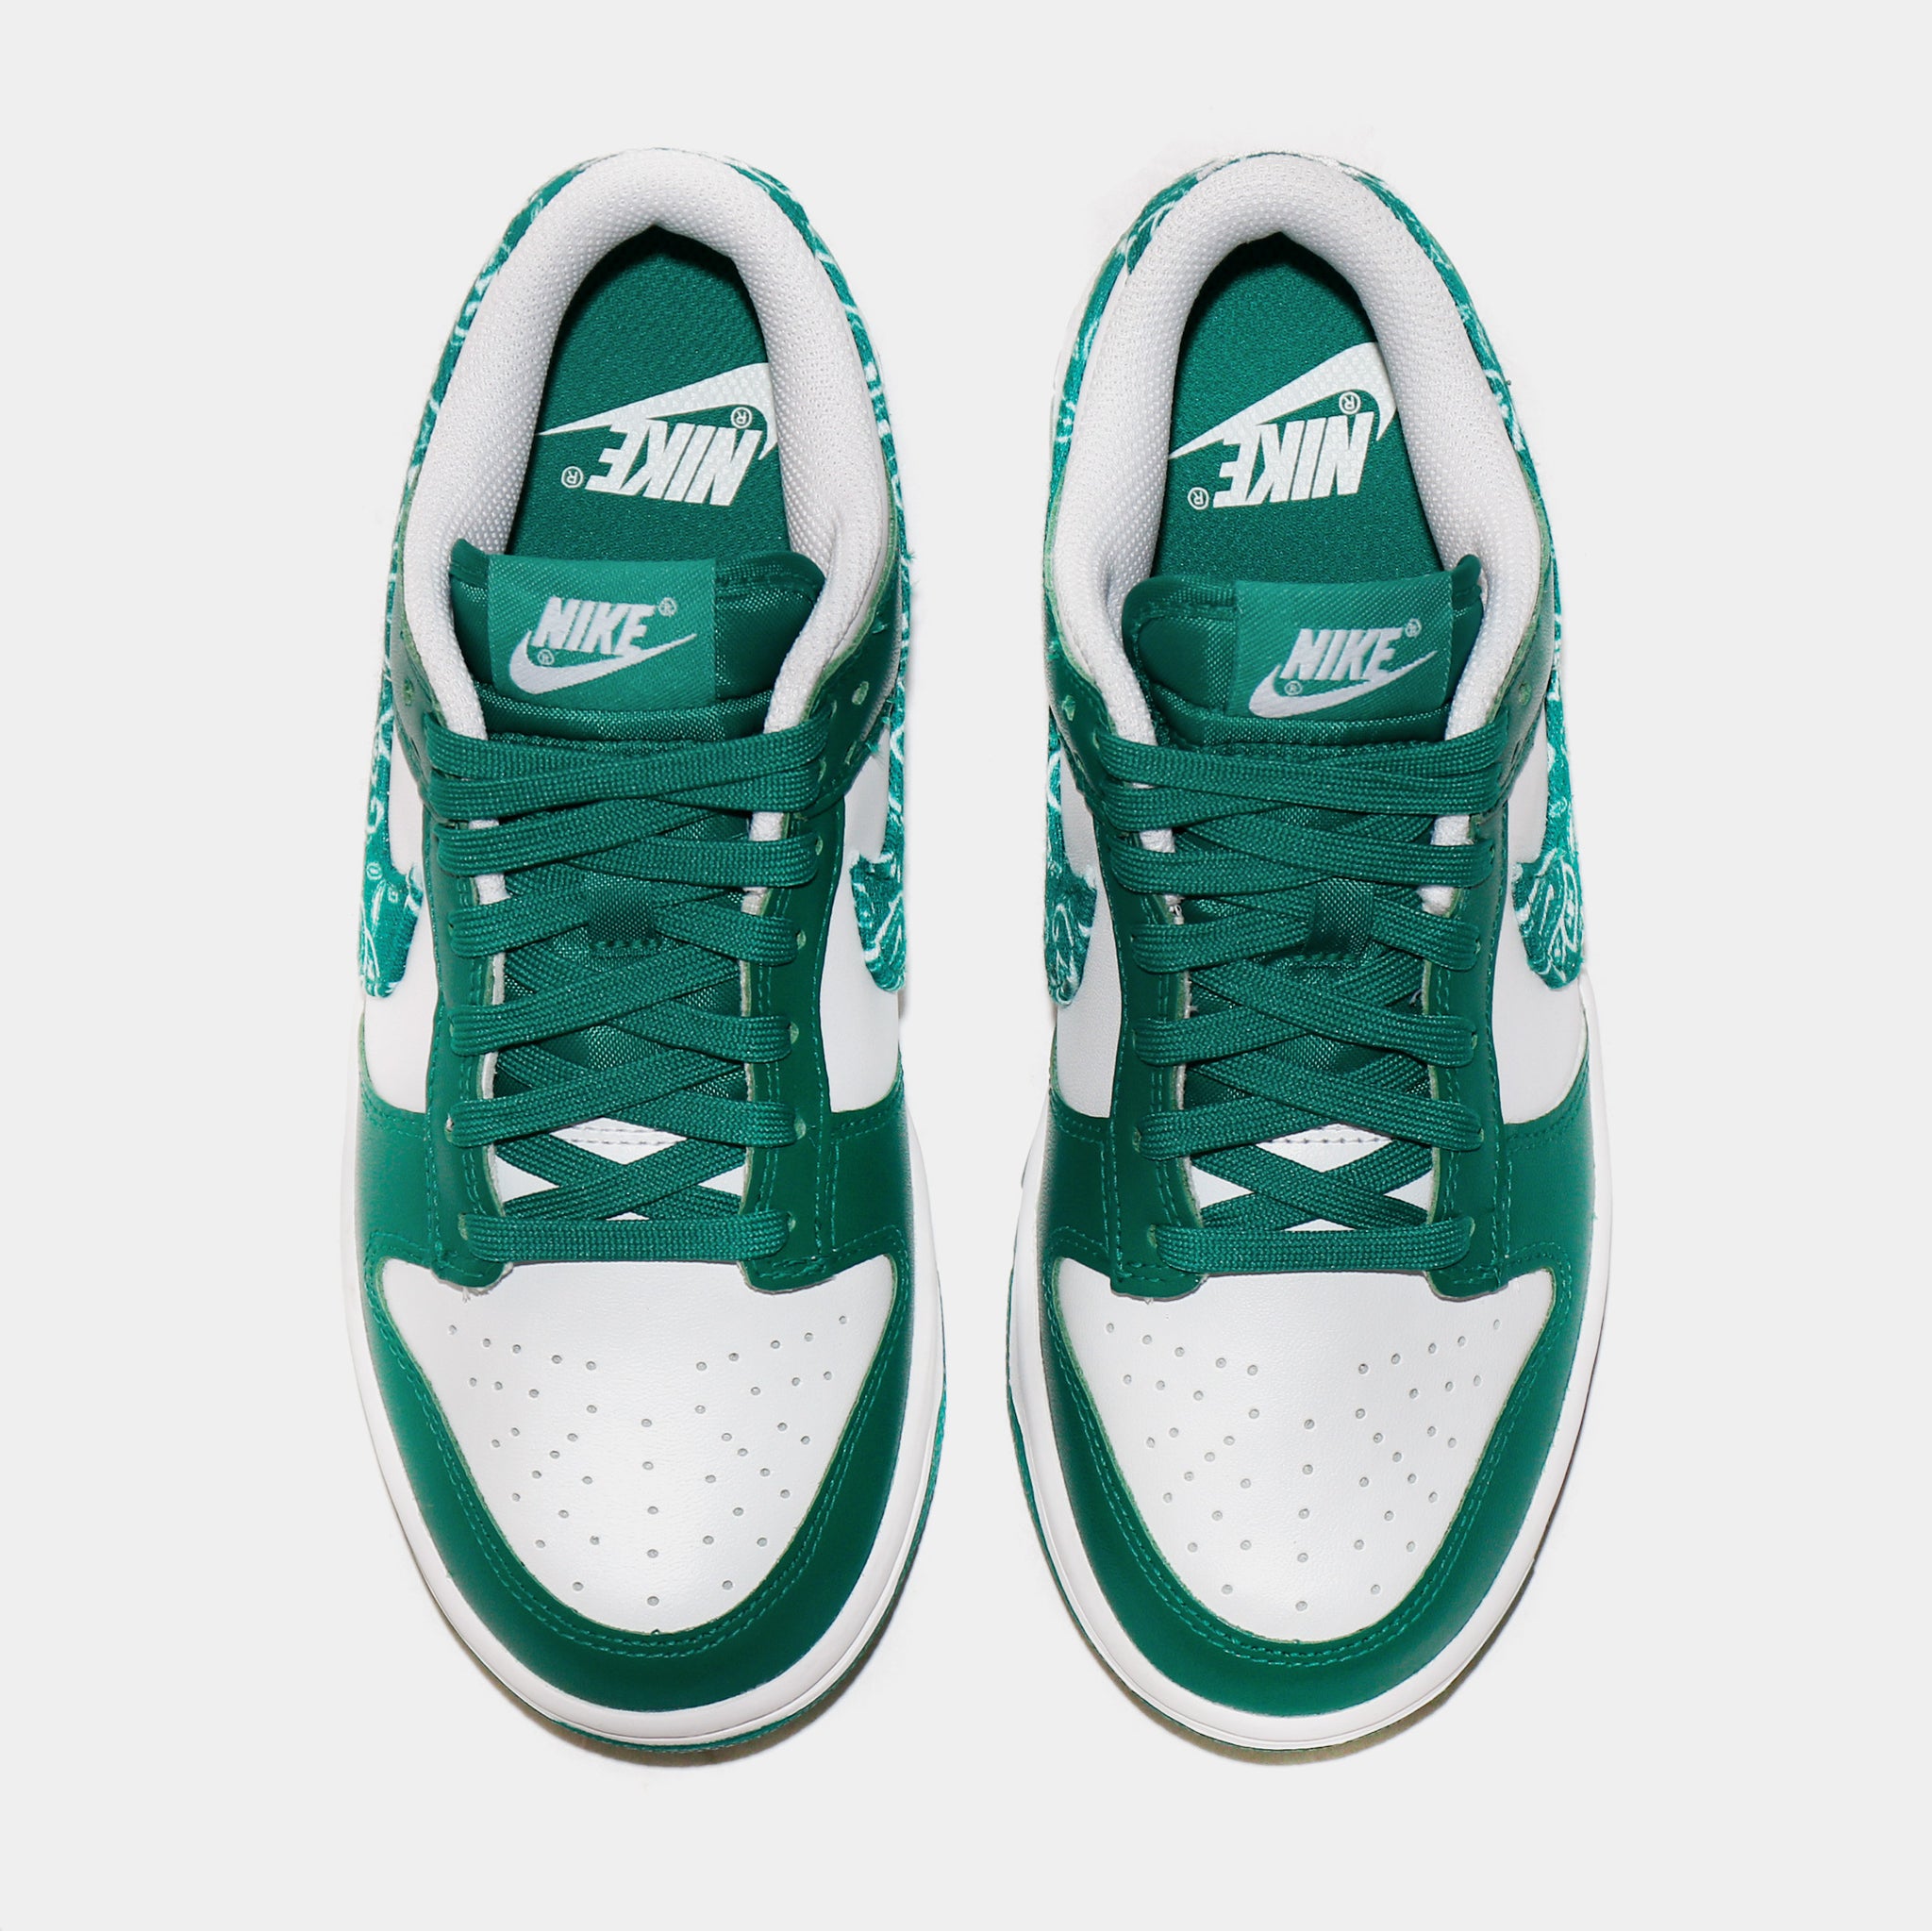 Dunk Low Green Paisley Womens Lifestyle Shoes (Green) Limit One Per Customer